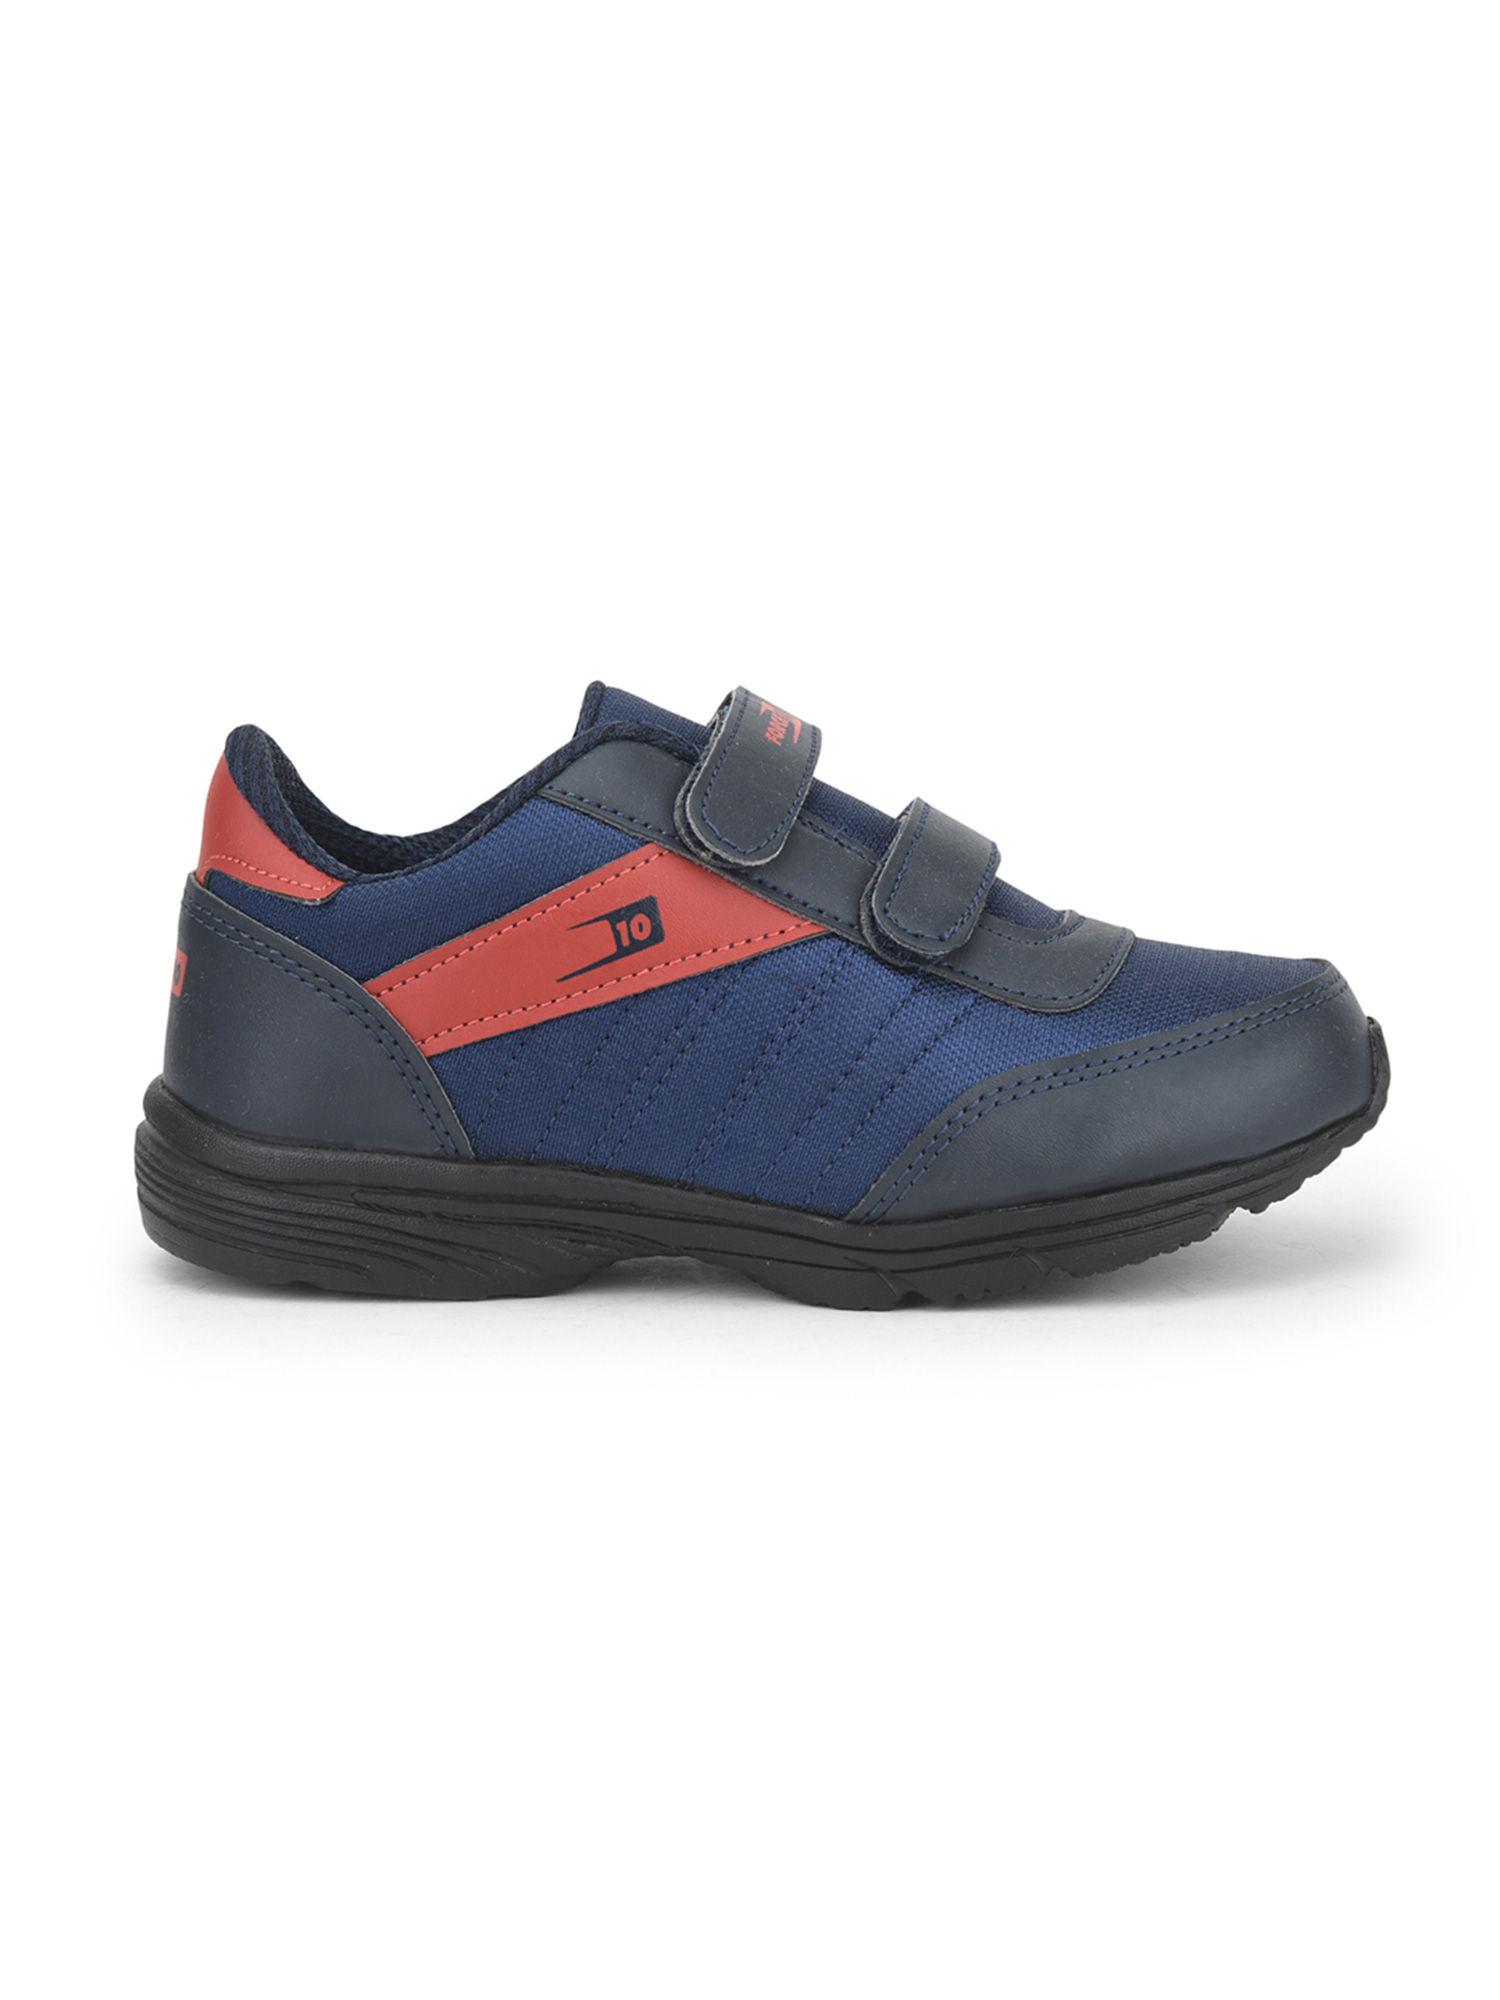 force 10 9907-51vbl red and blue casual shoes for kids